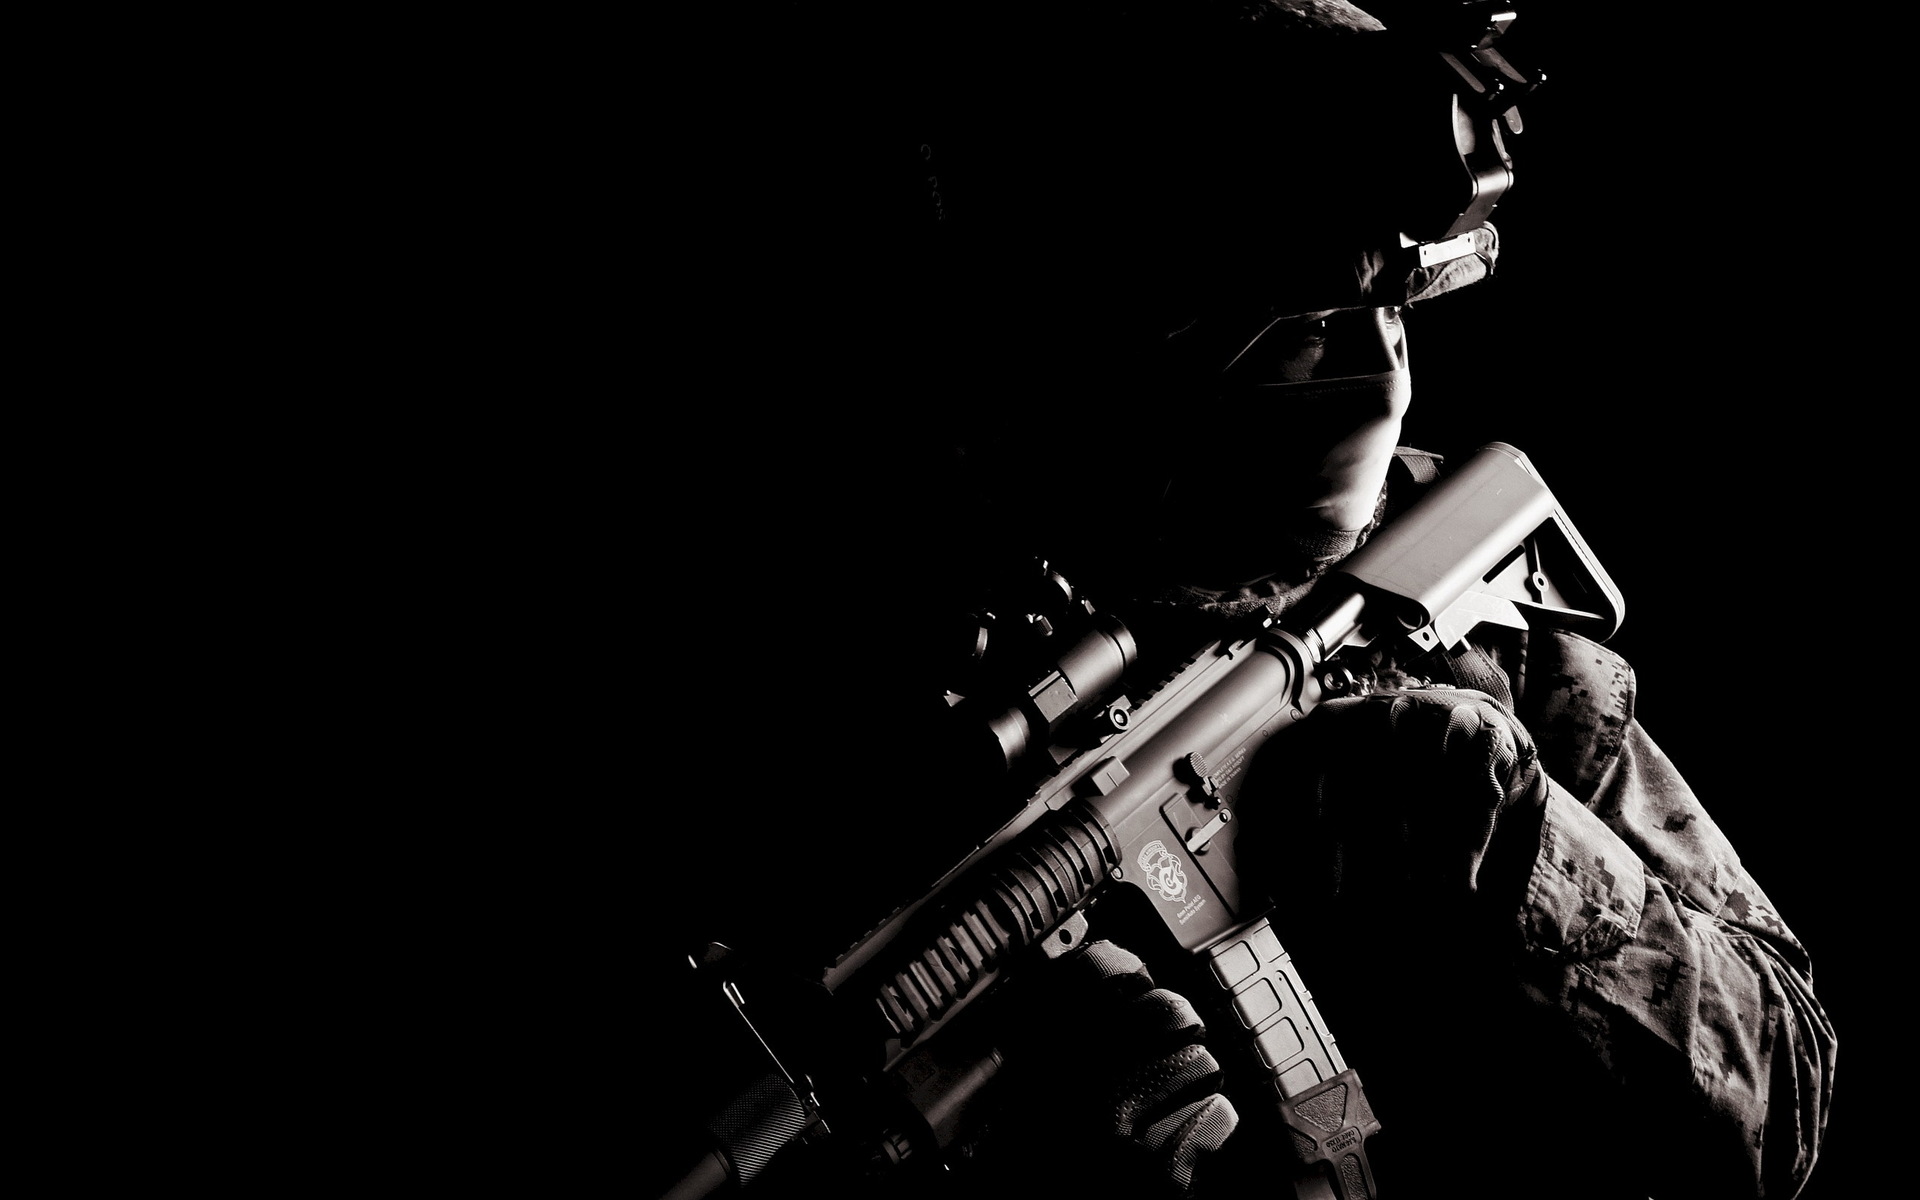 Download the following Navy Seal Wallpaper by clicking the